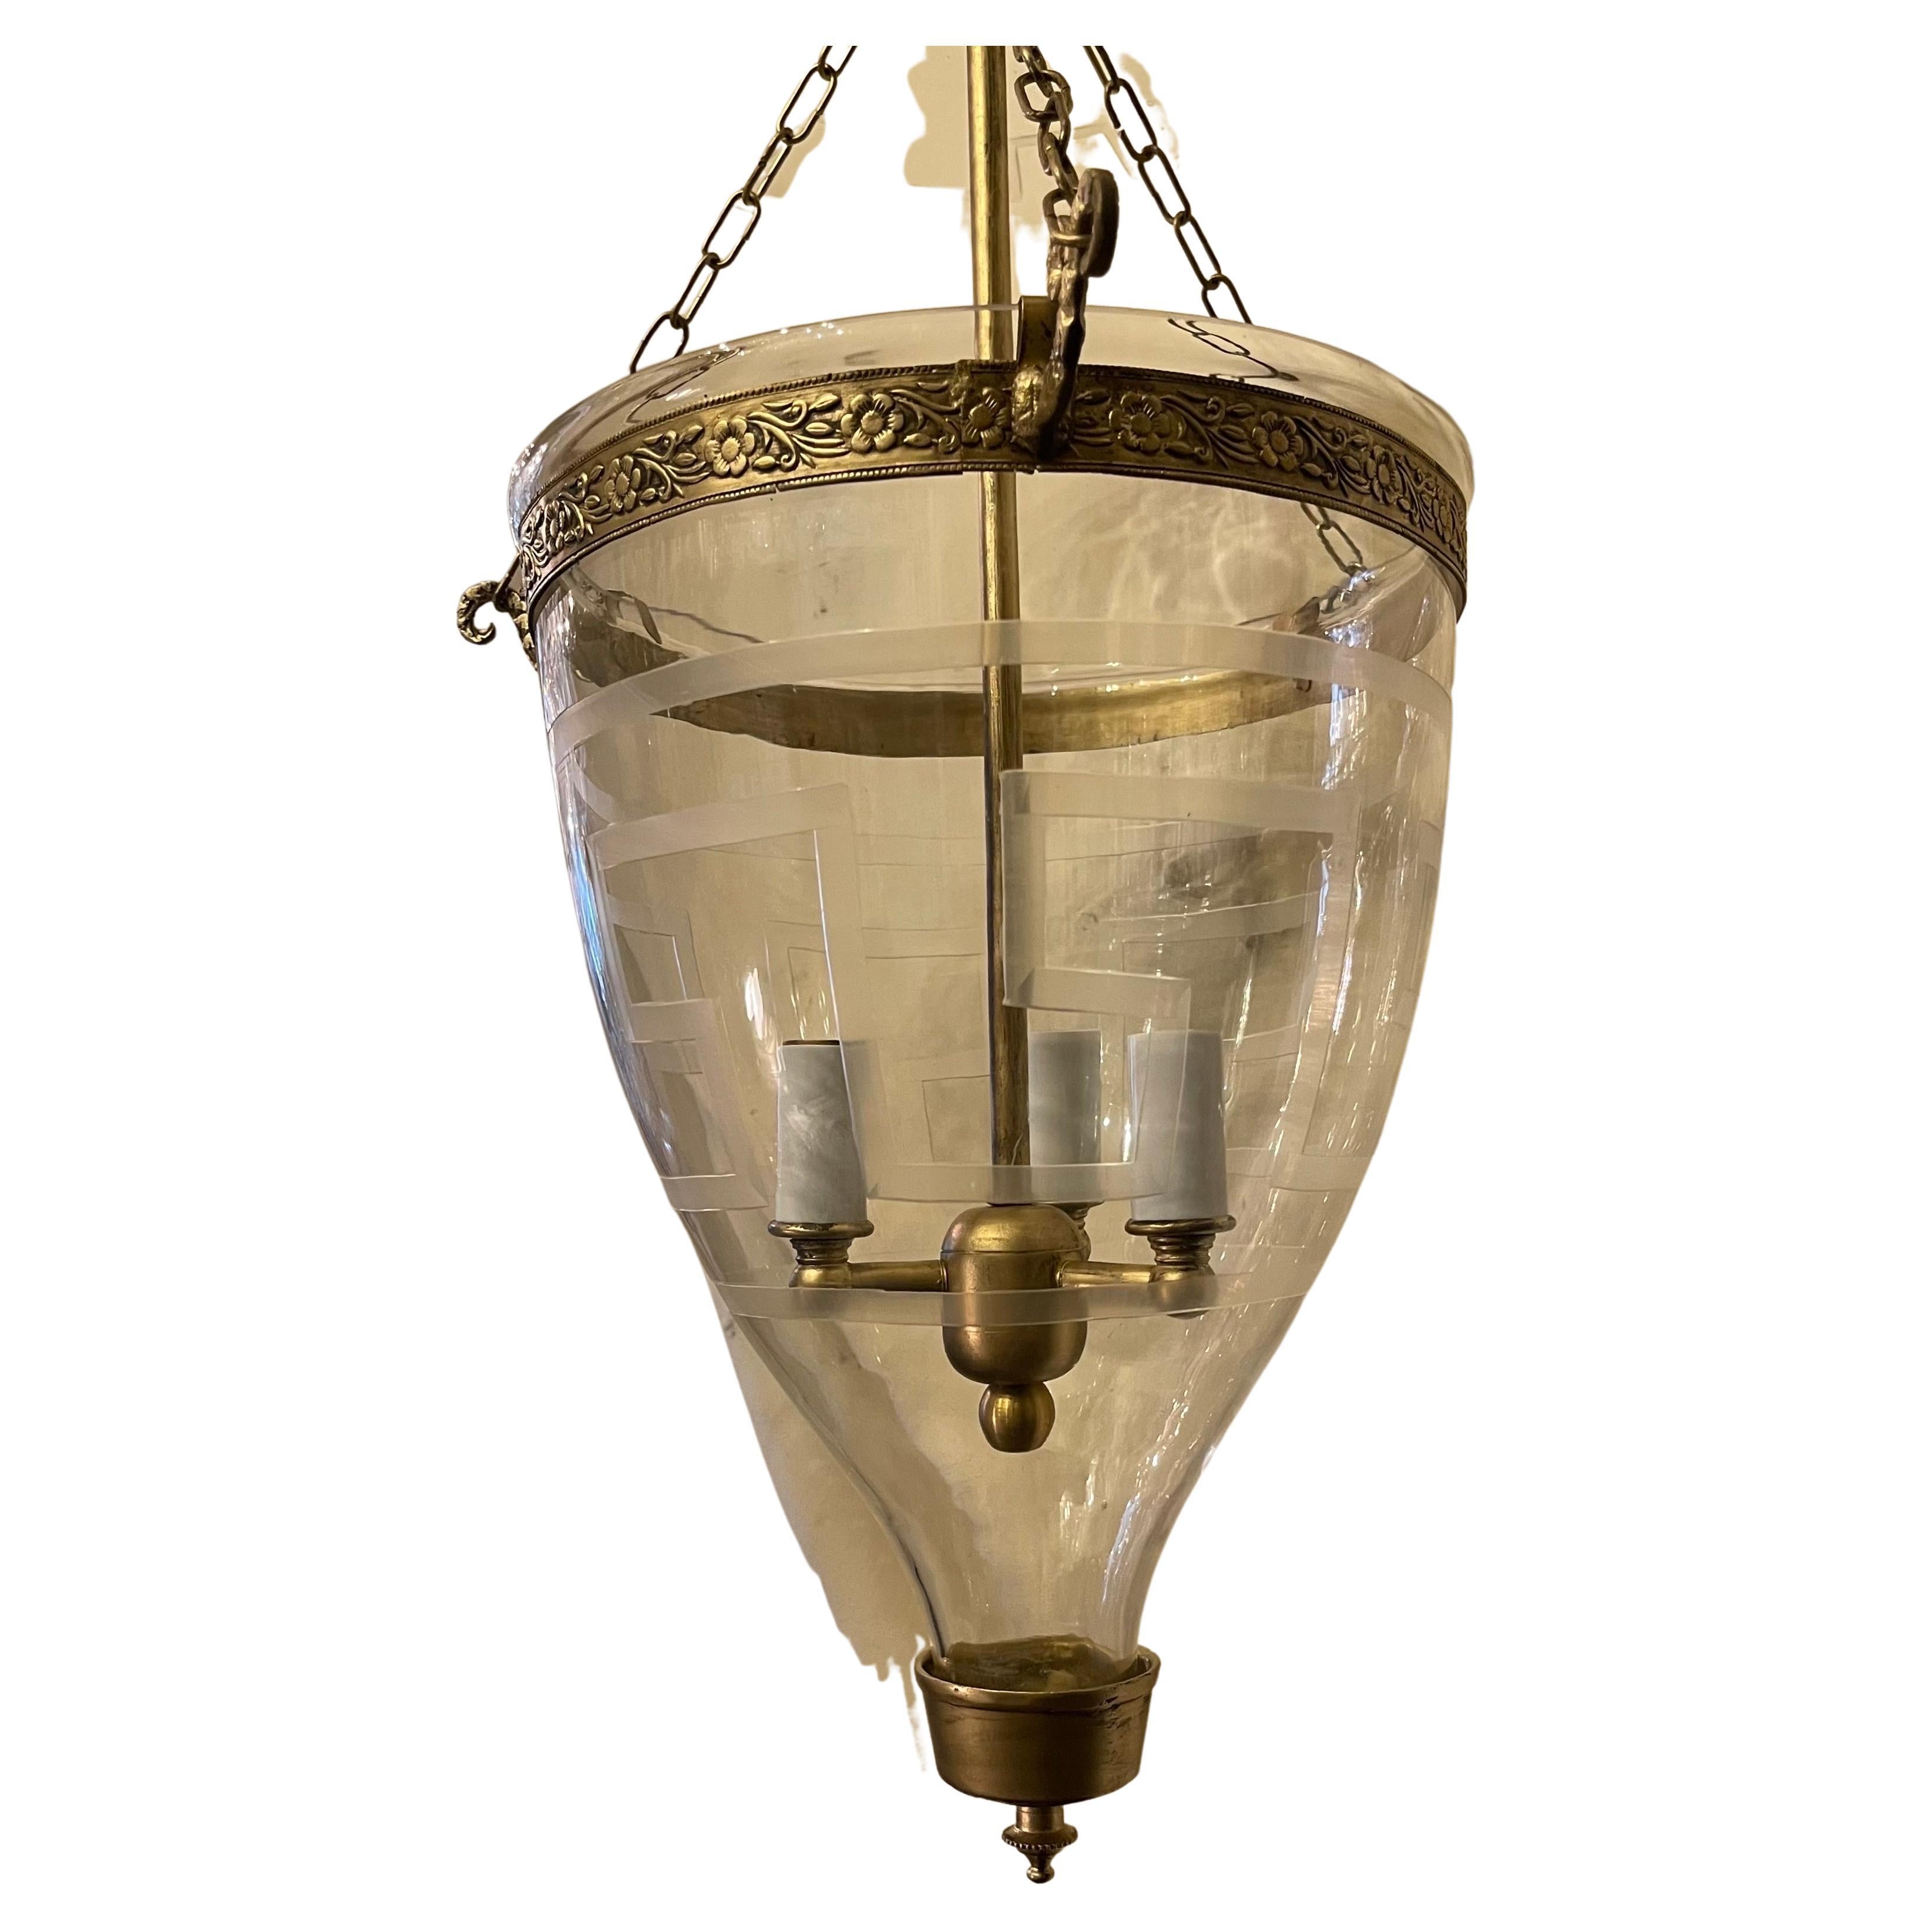 A Wonderful Regency / Neoclassical Three Candelabra Light Vaughan Bell Jar Glass & Brass Lantern With Greek Key Pattern Etched On Both The Bell And Top Glass Shade

Rewired And Ready To Install With Chain And Canopy  